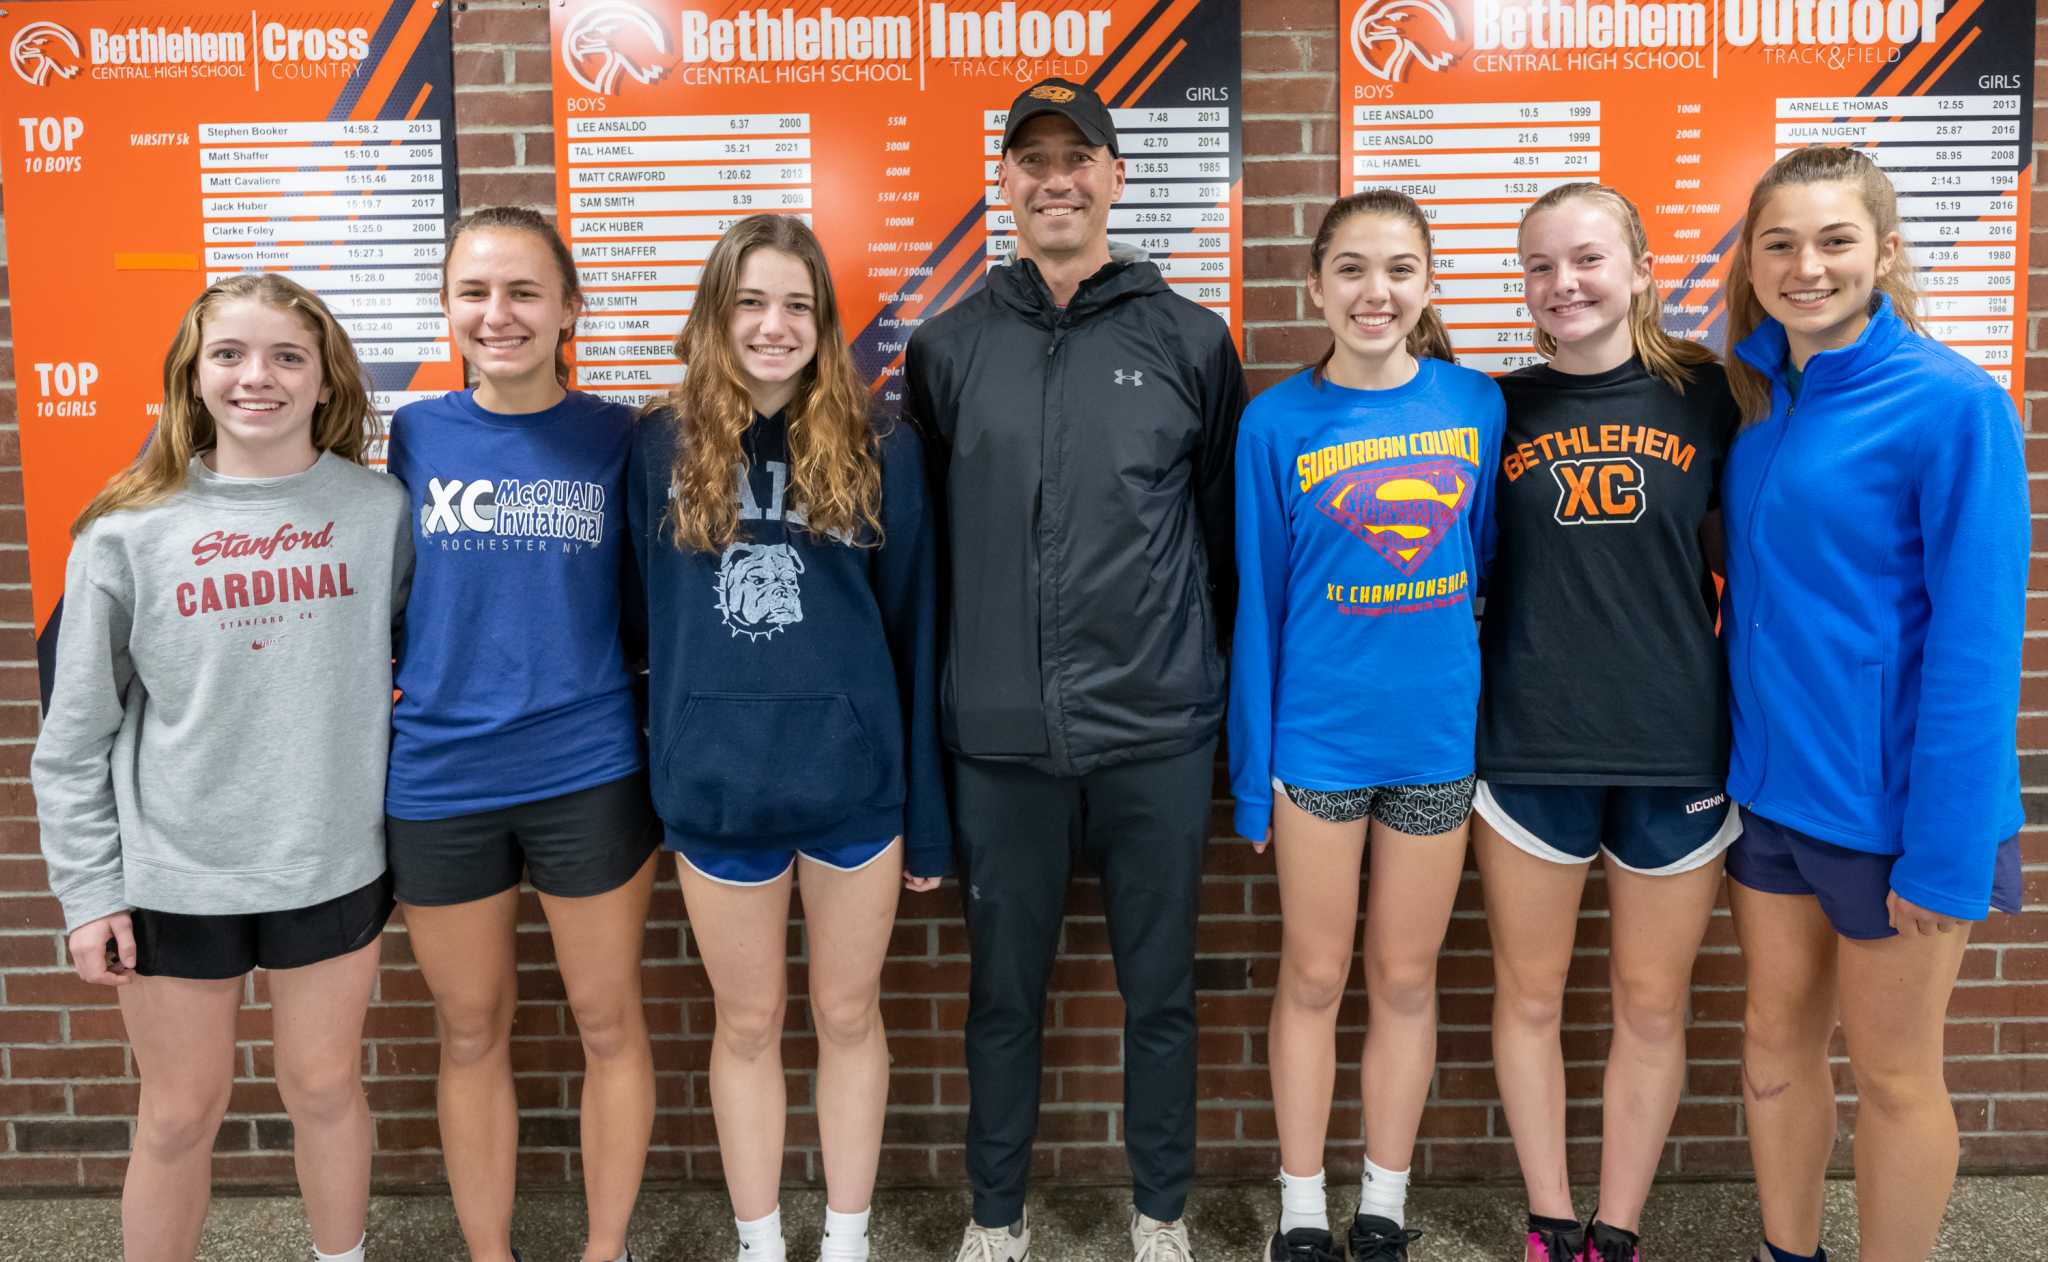 Bethlehem girls' cross country team thrilled to reach Nike Cross Nationals